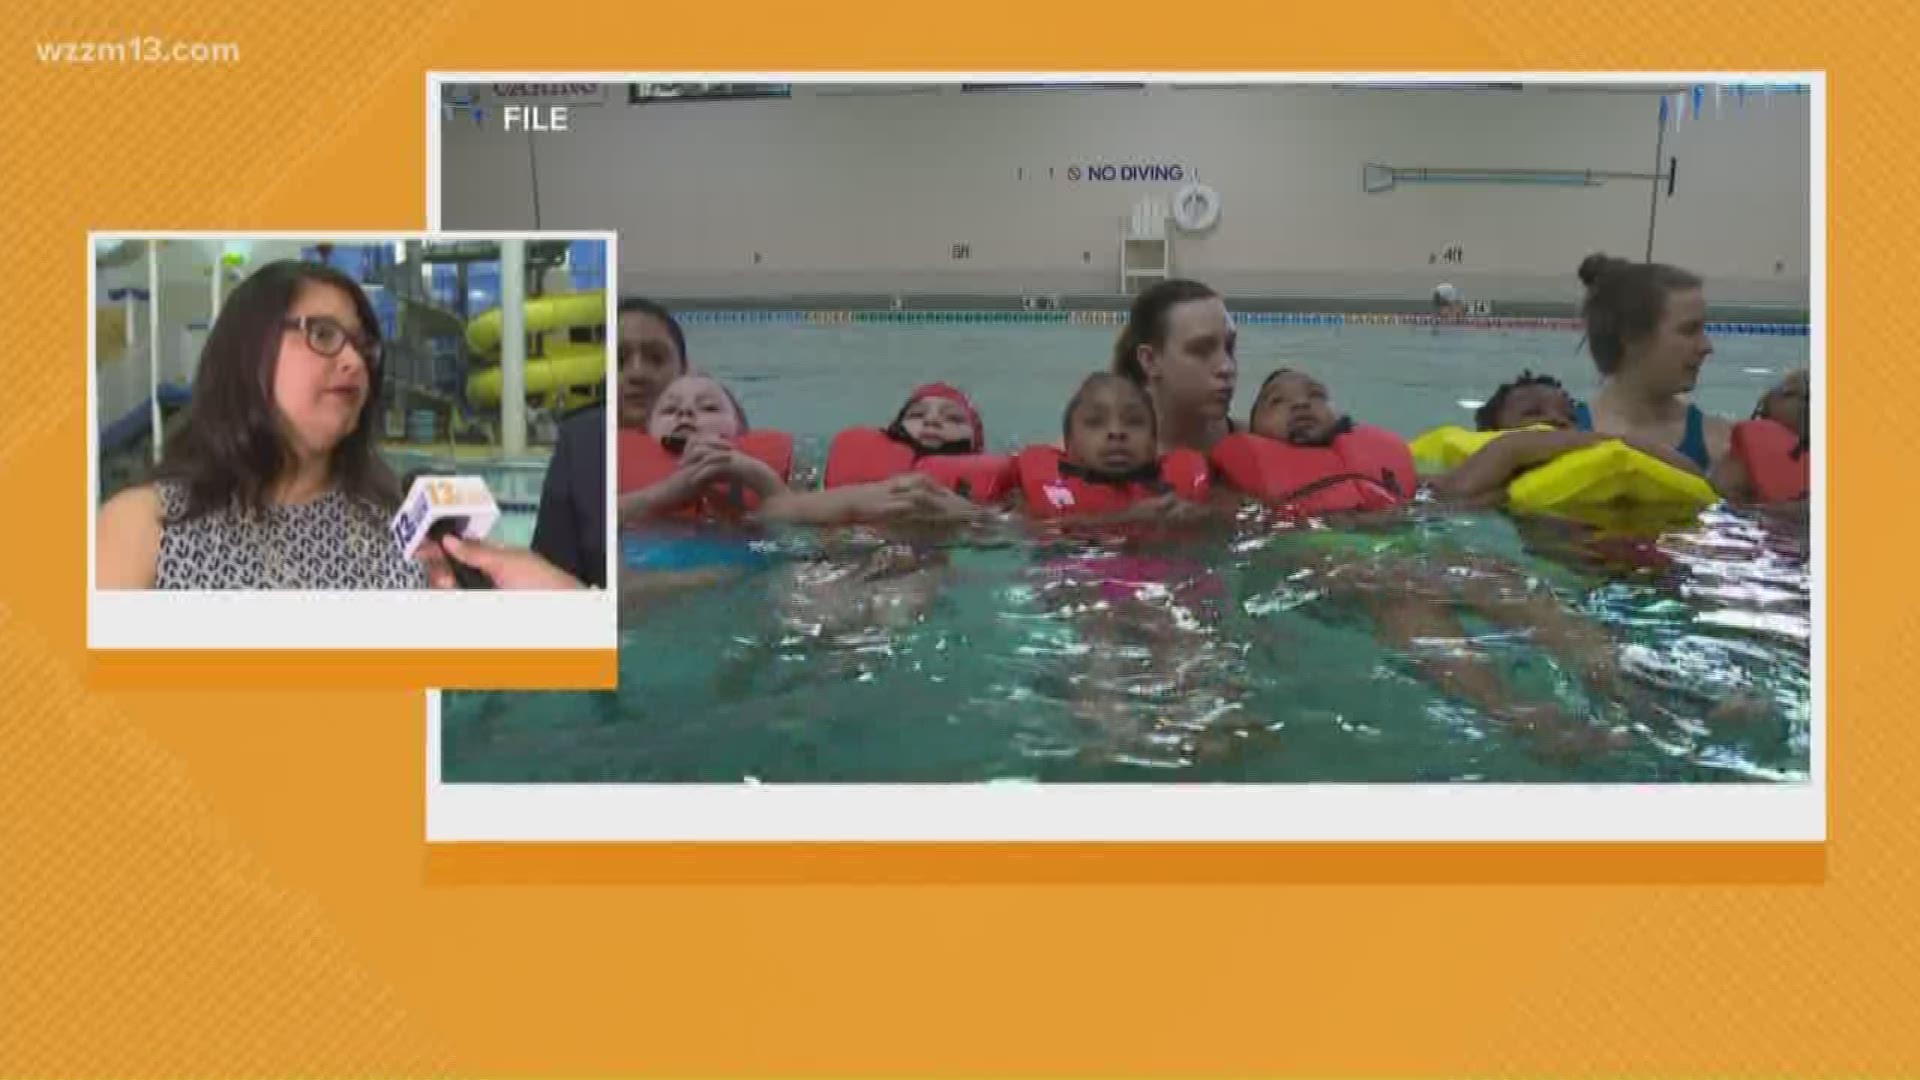 World's Largest Swimming Lesson teaches safety